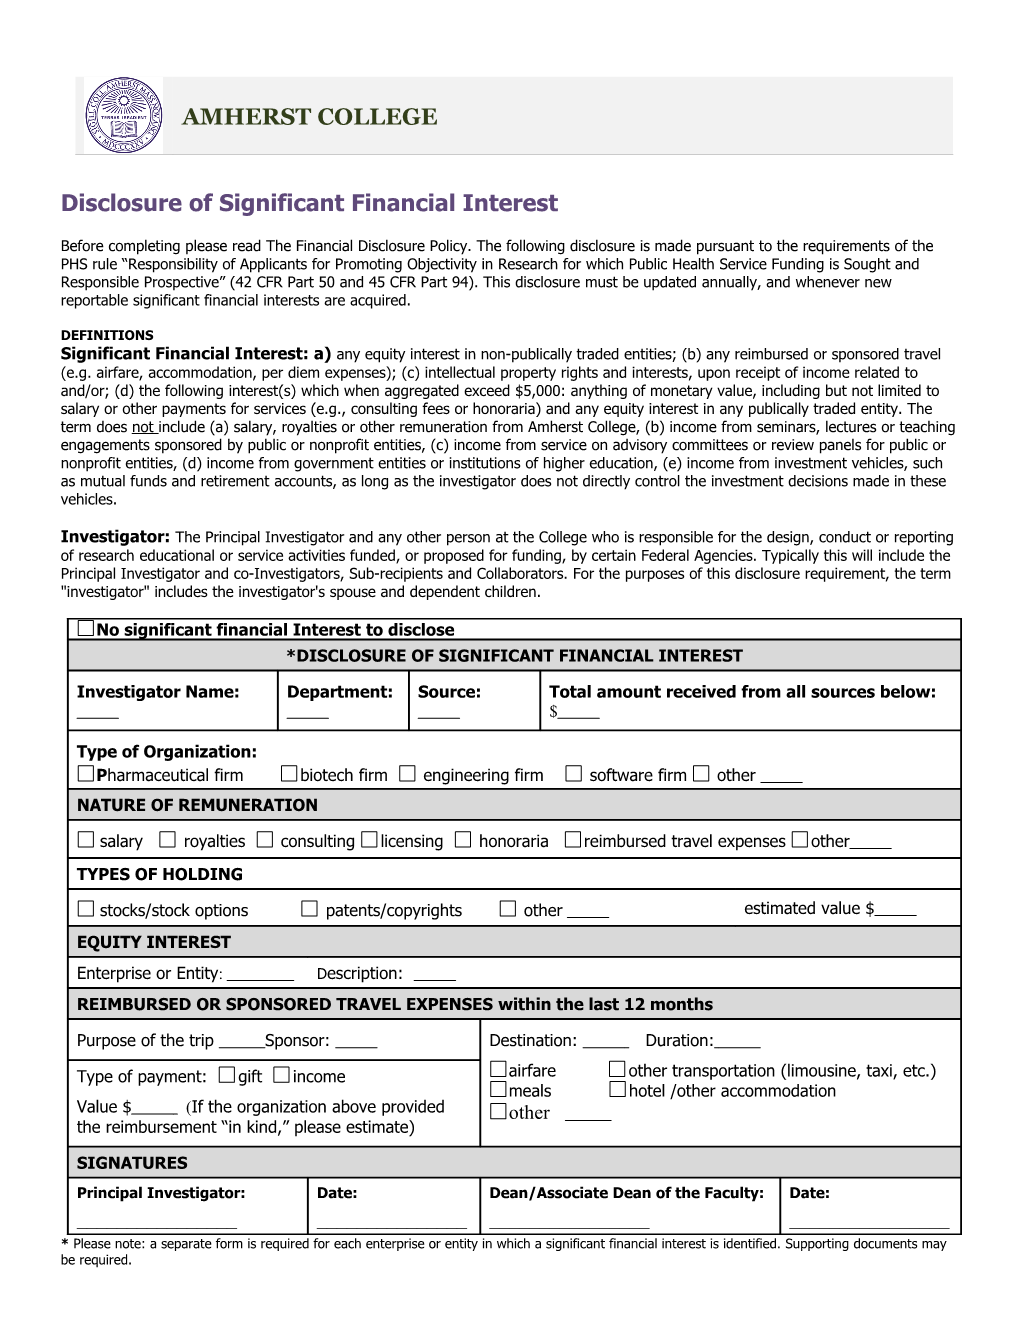 Disclosure of Significant Financial Interest